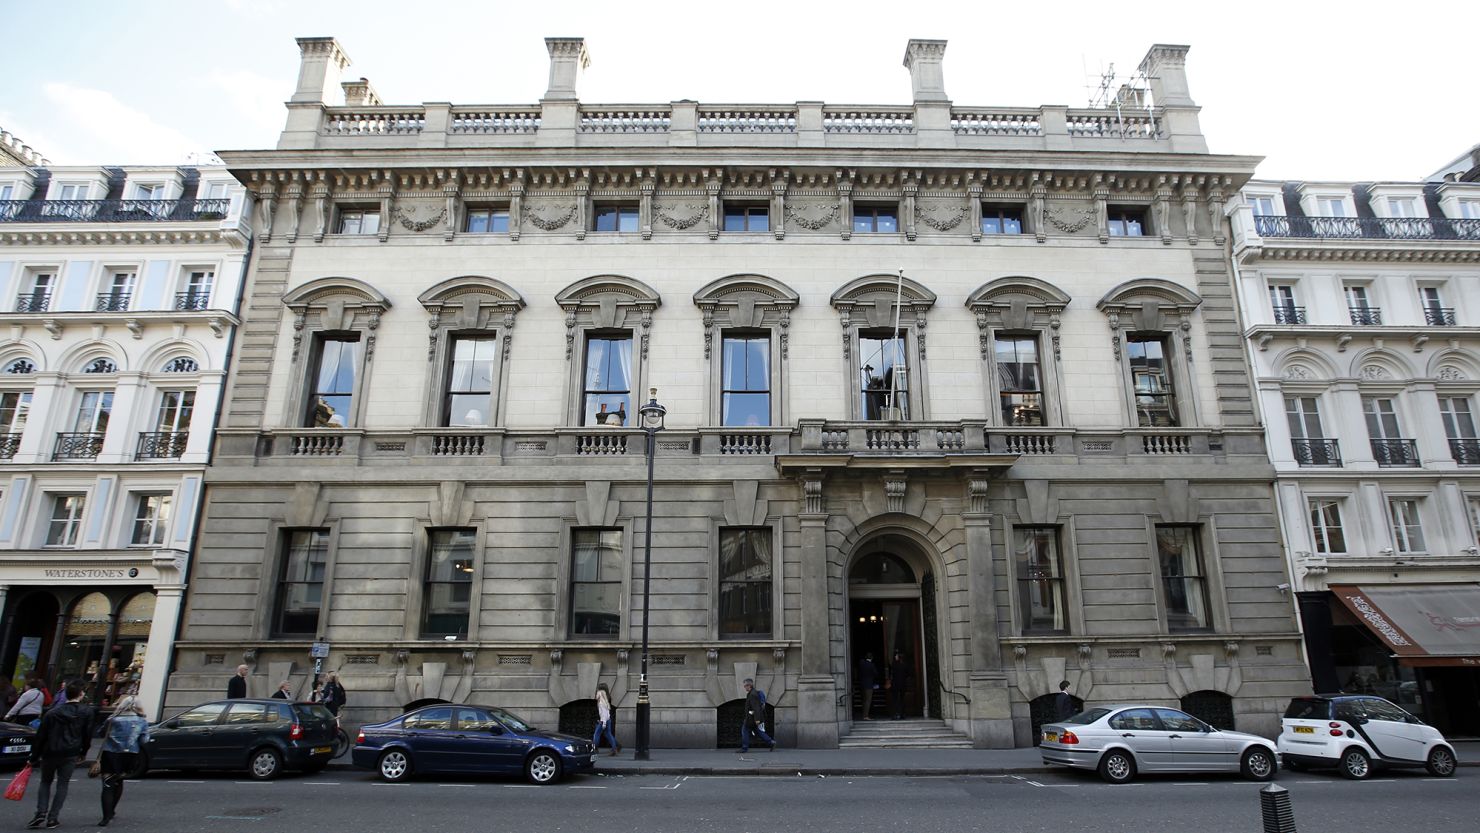 What is the Garrick Club? London's famous Club votes to allow women, nearly 200 years after it was founded